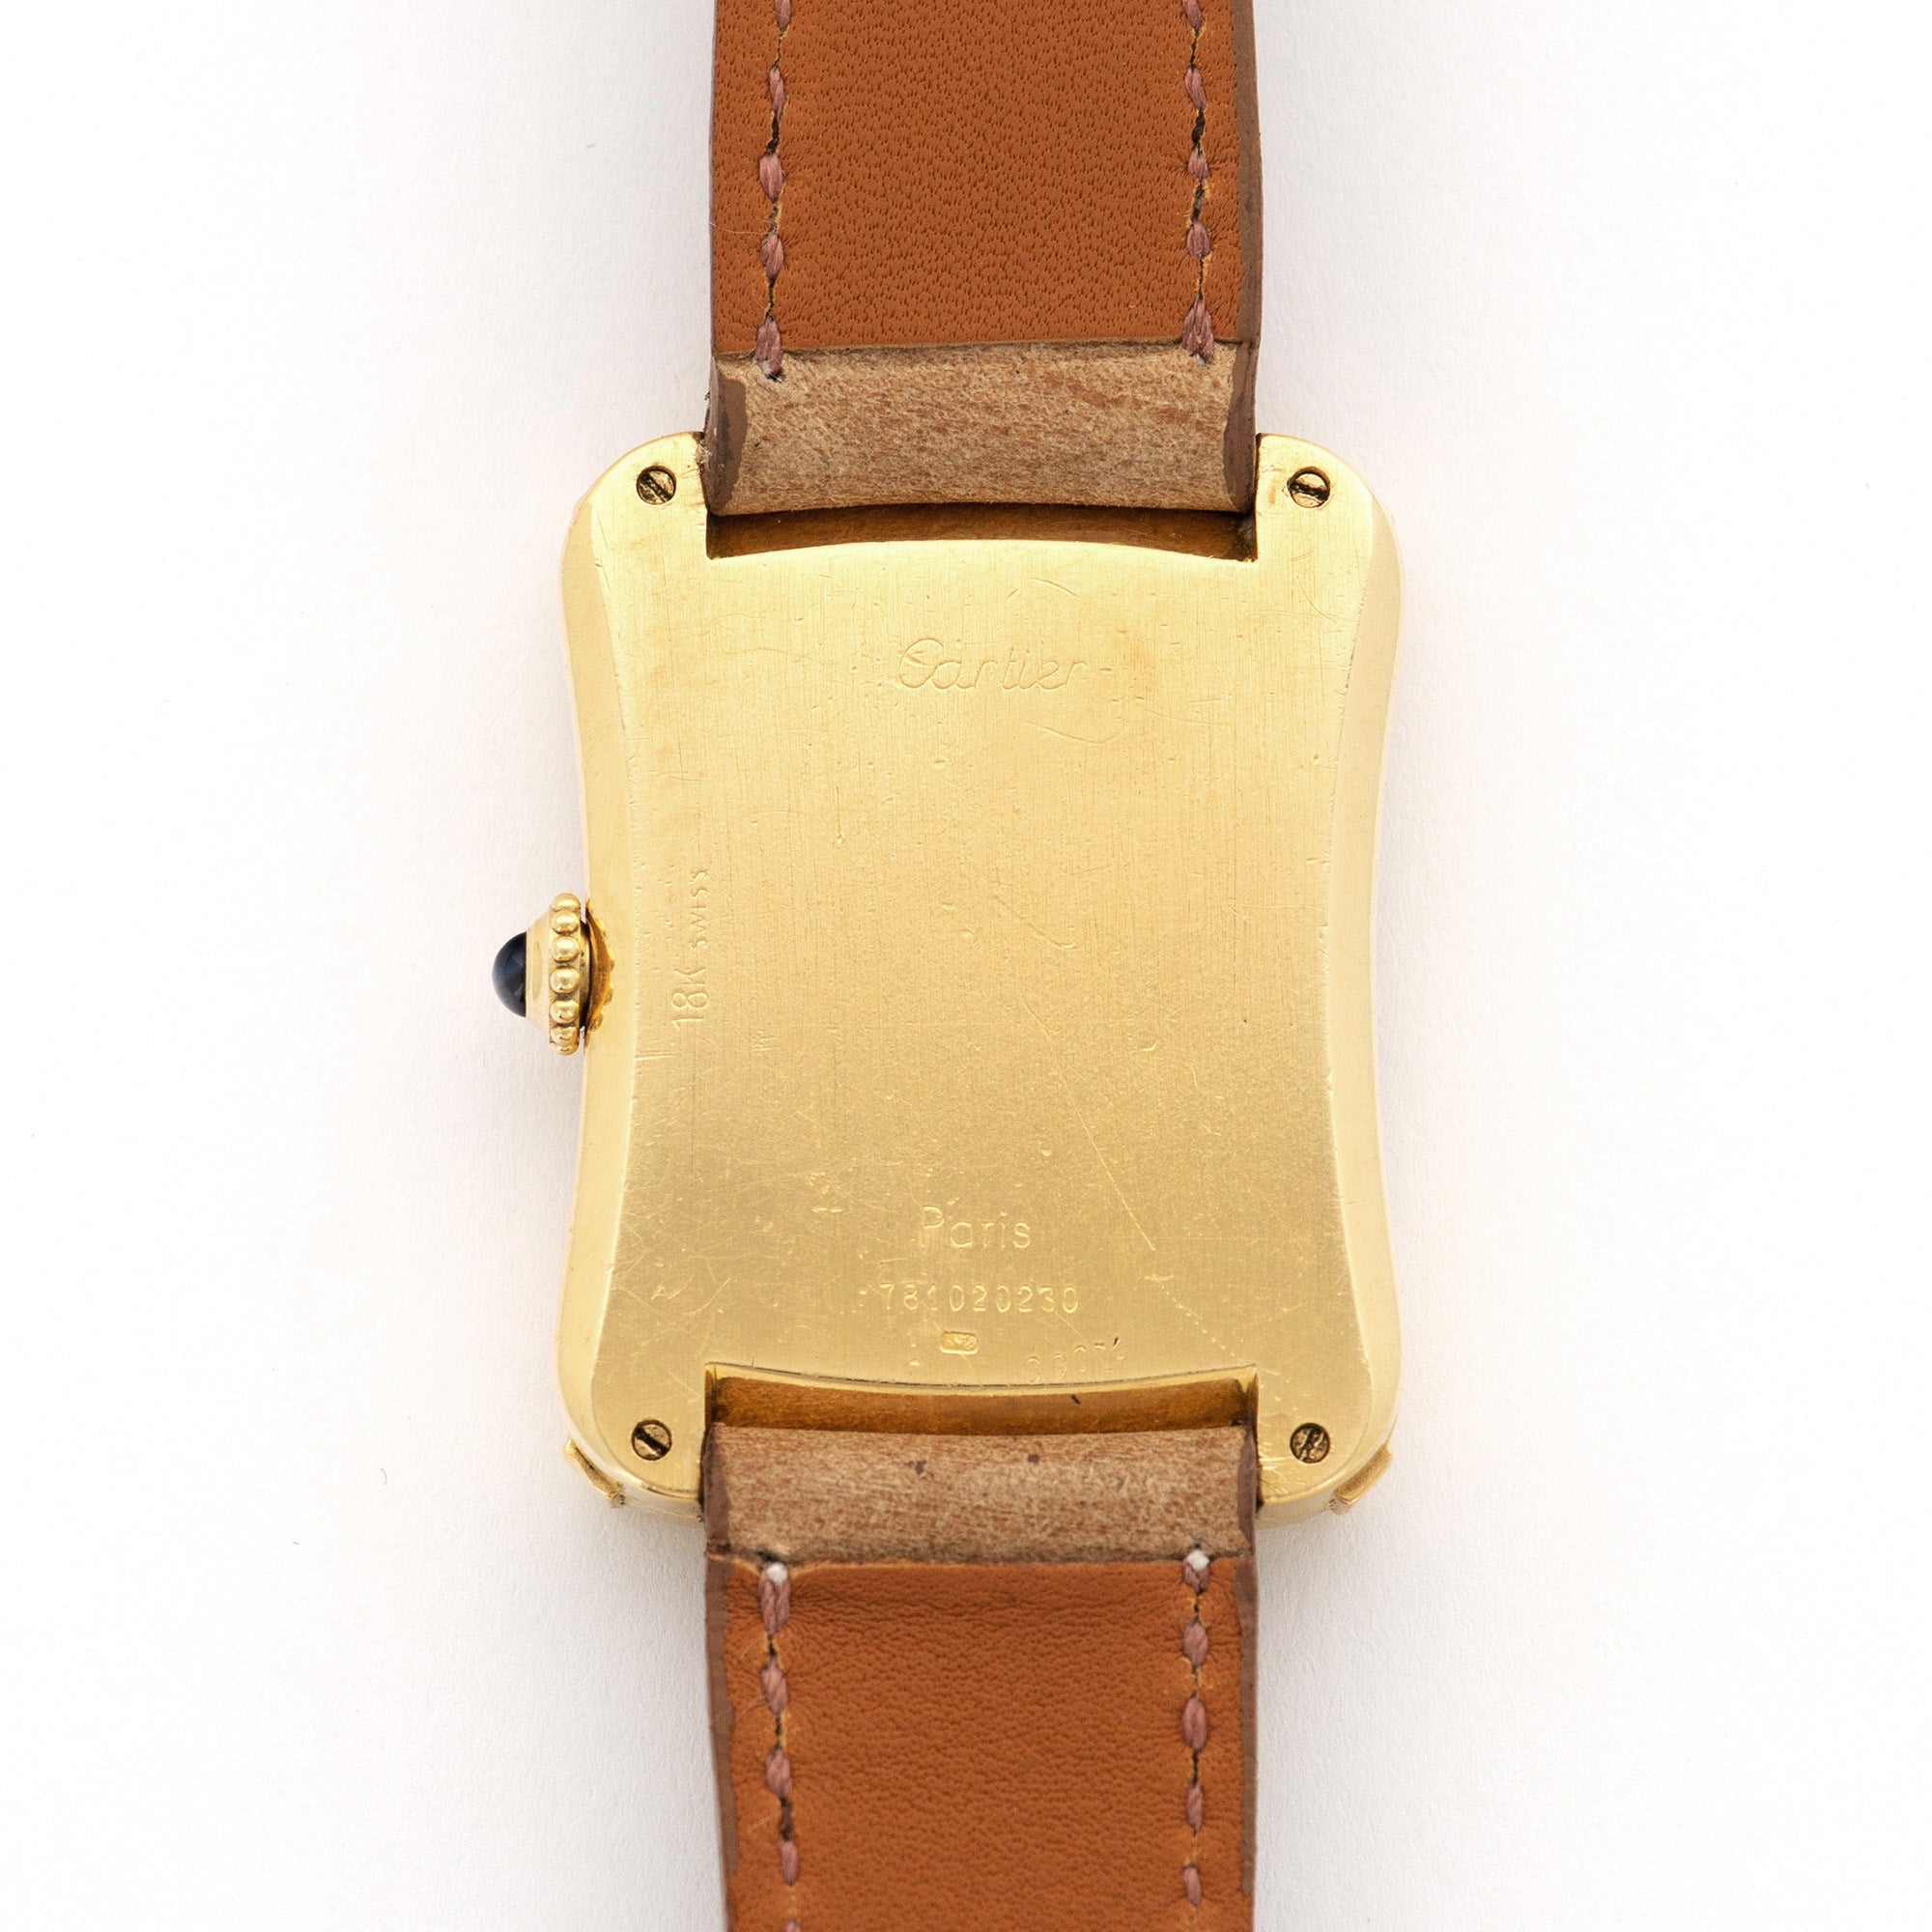 Cartier - Cartier Yellow Gold Bamboo Coussin Watch - The Keystone Watches